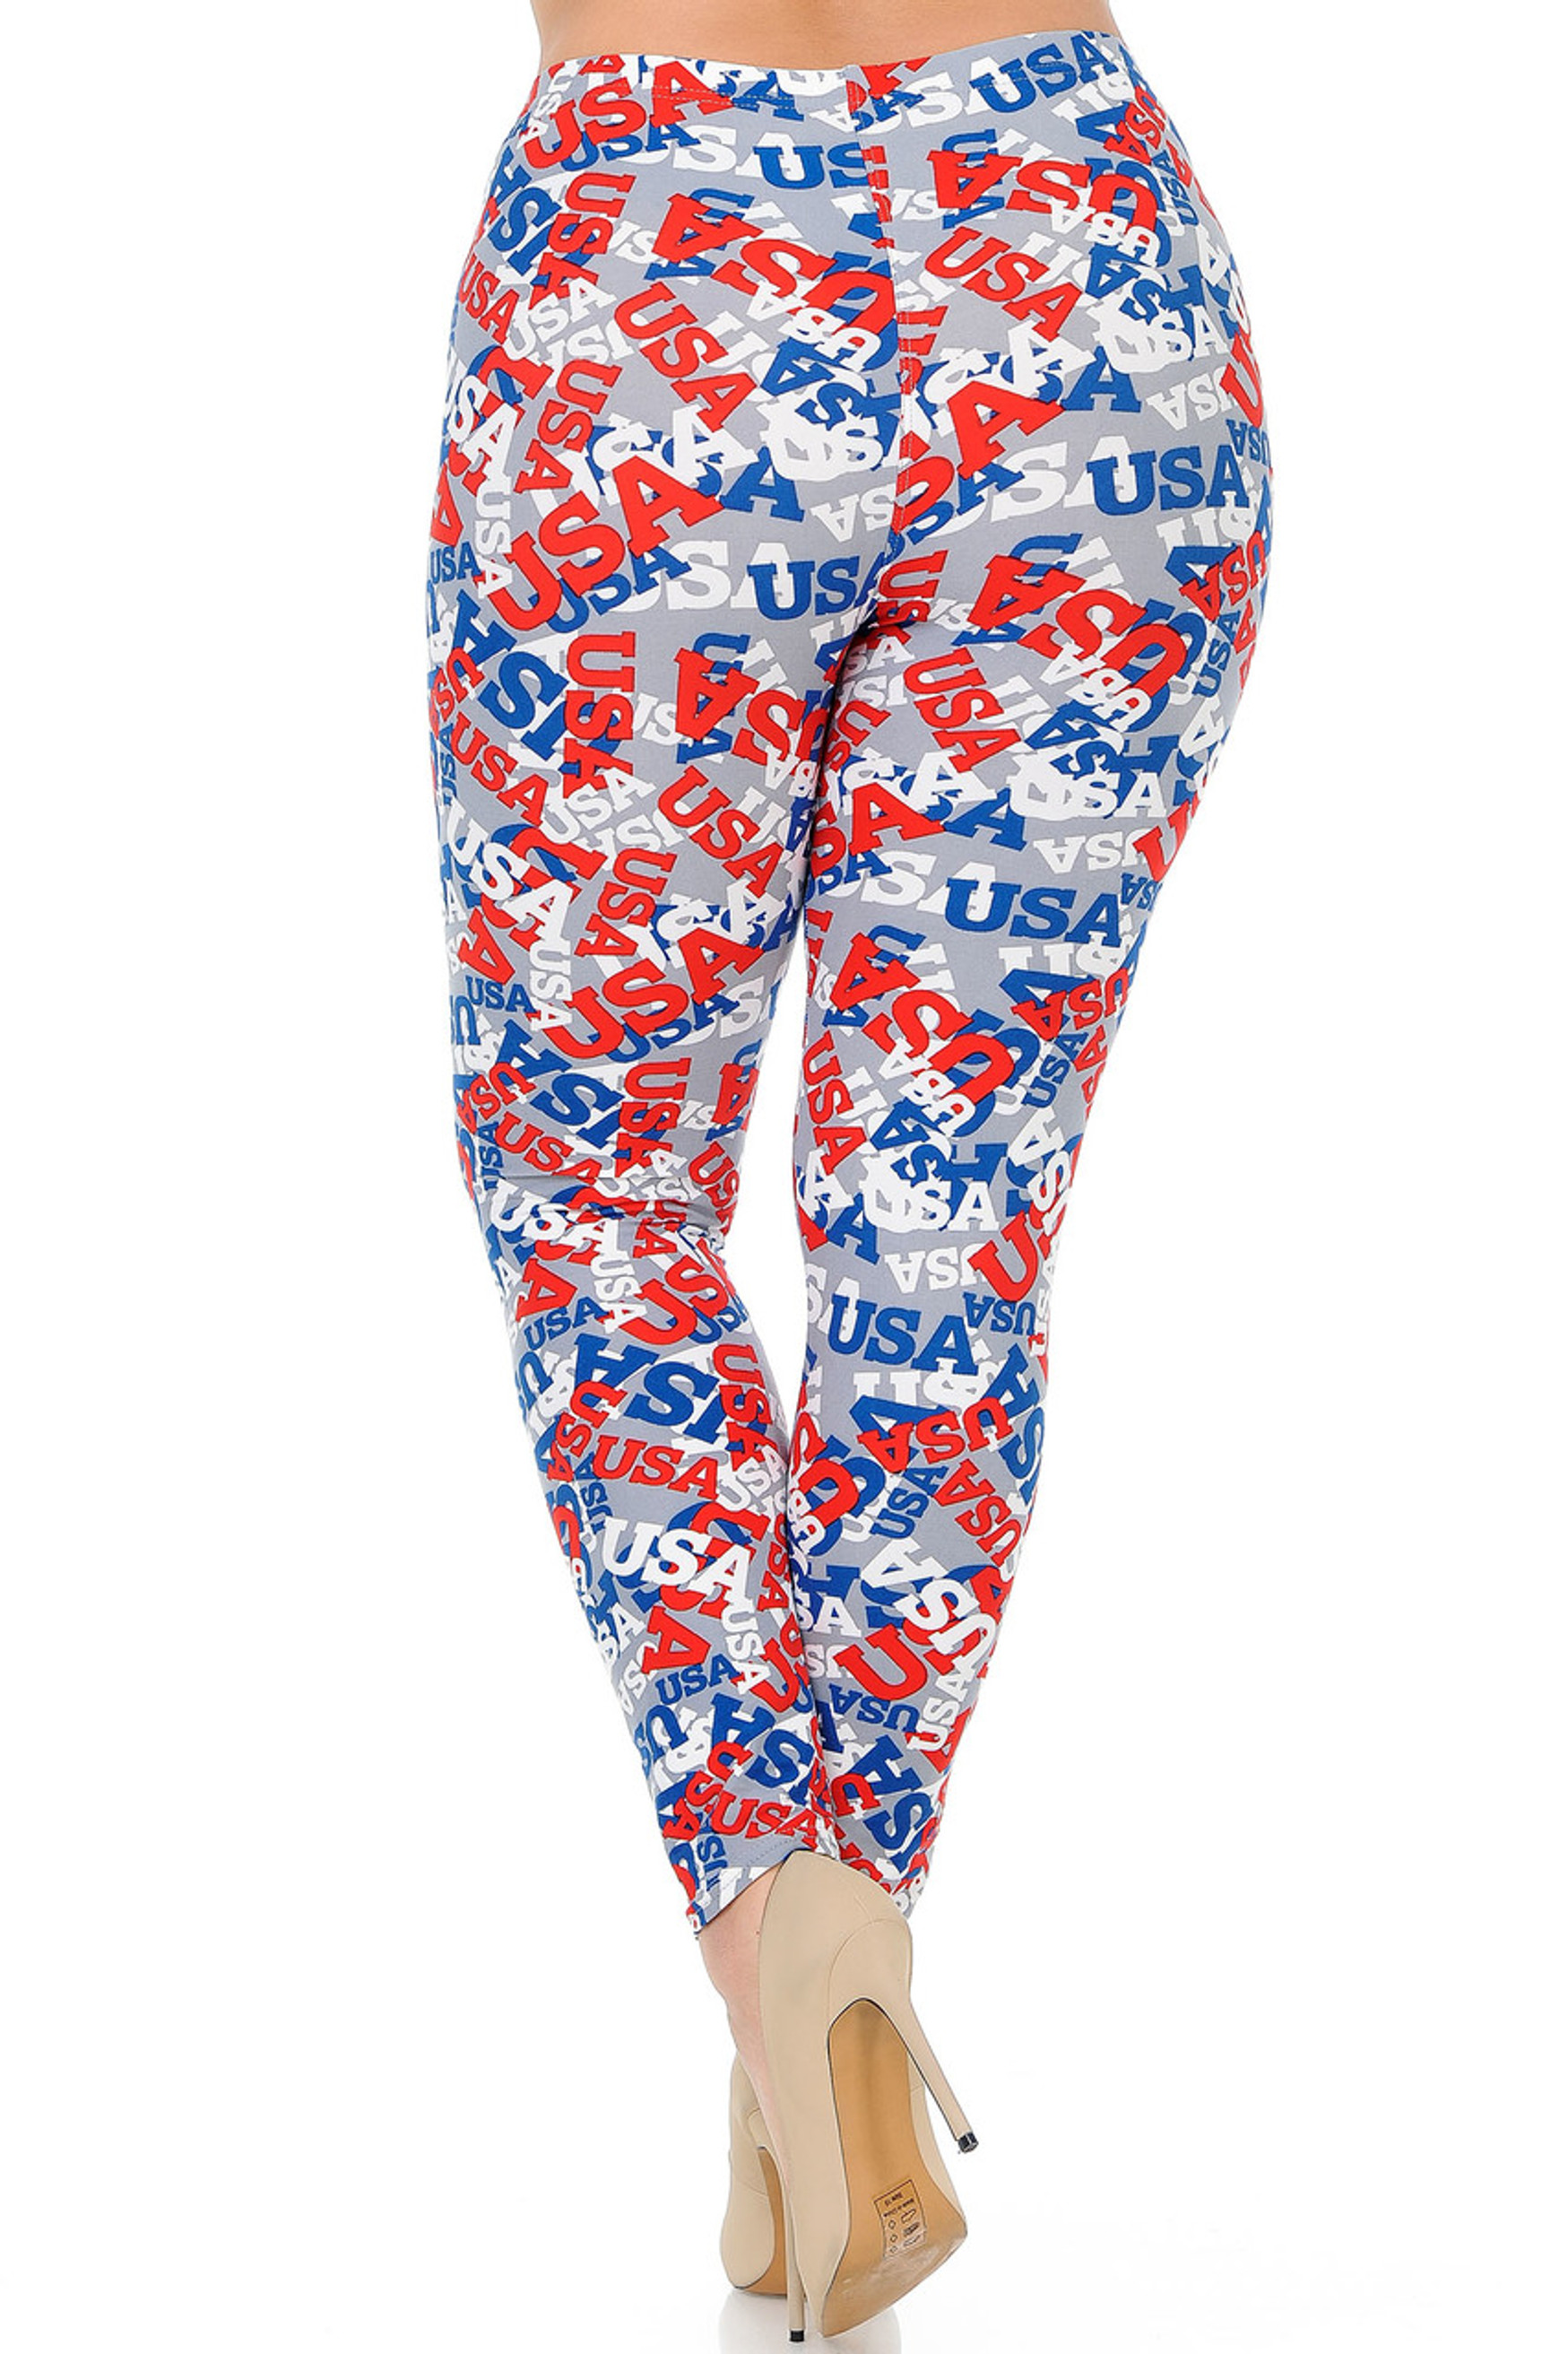 Buttery Soft All Over USA Extra Plus Size Leggings - 3X-5X